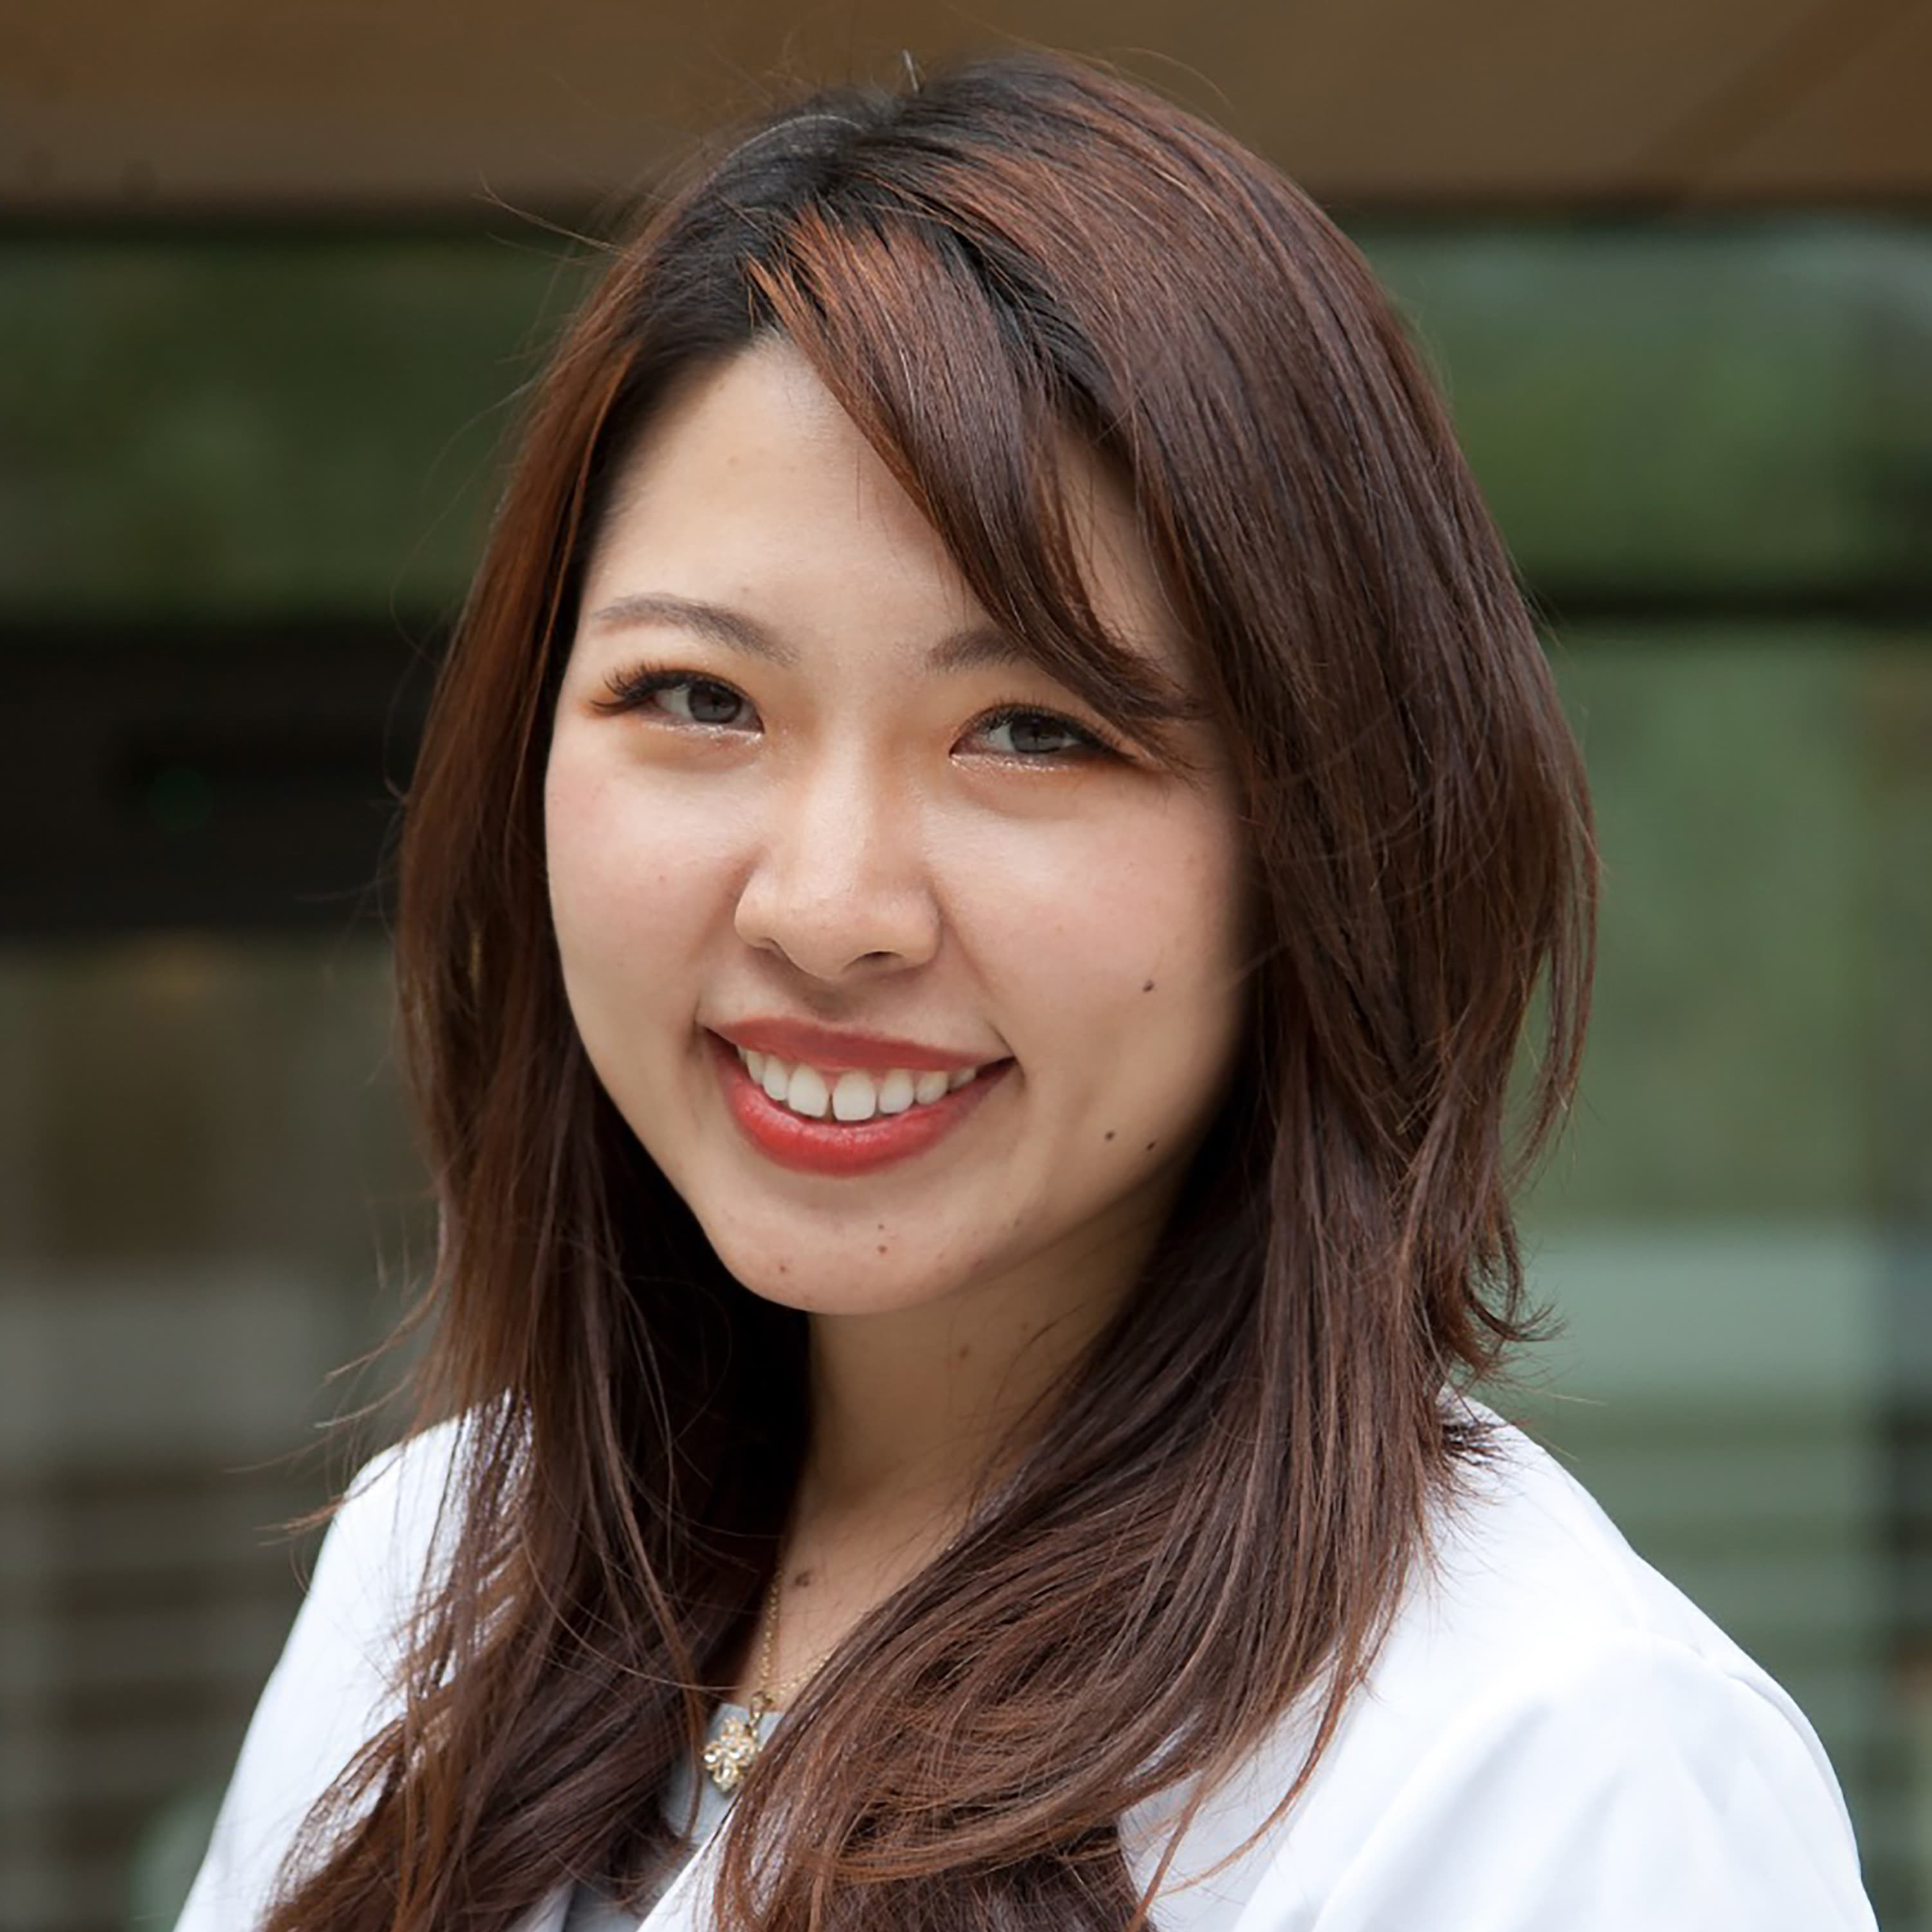 Dr. Evelyn Song